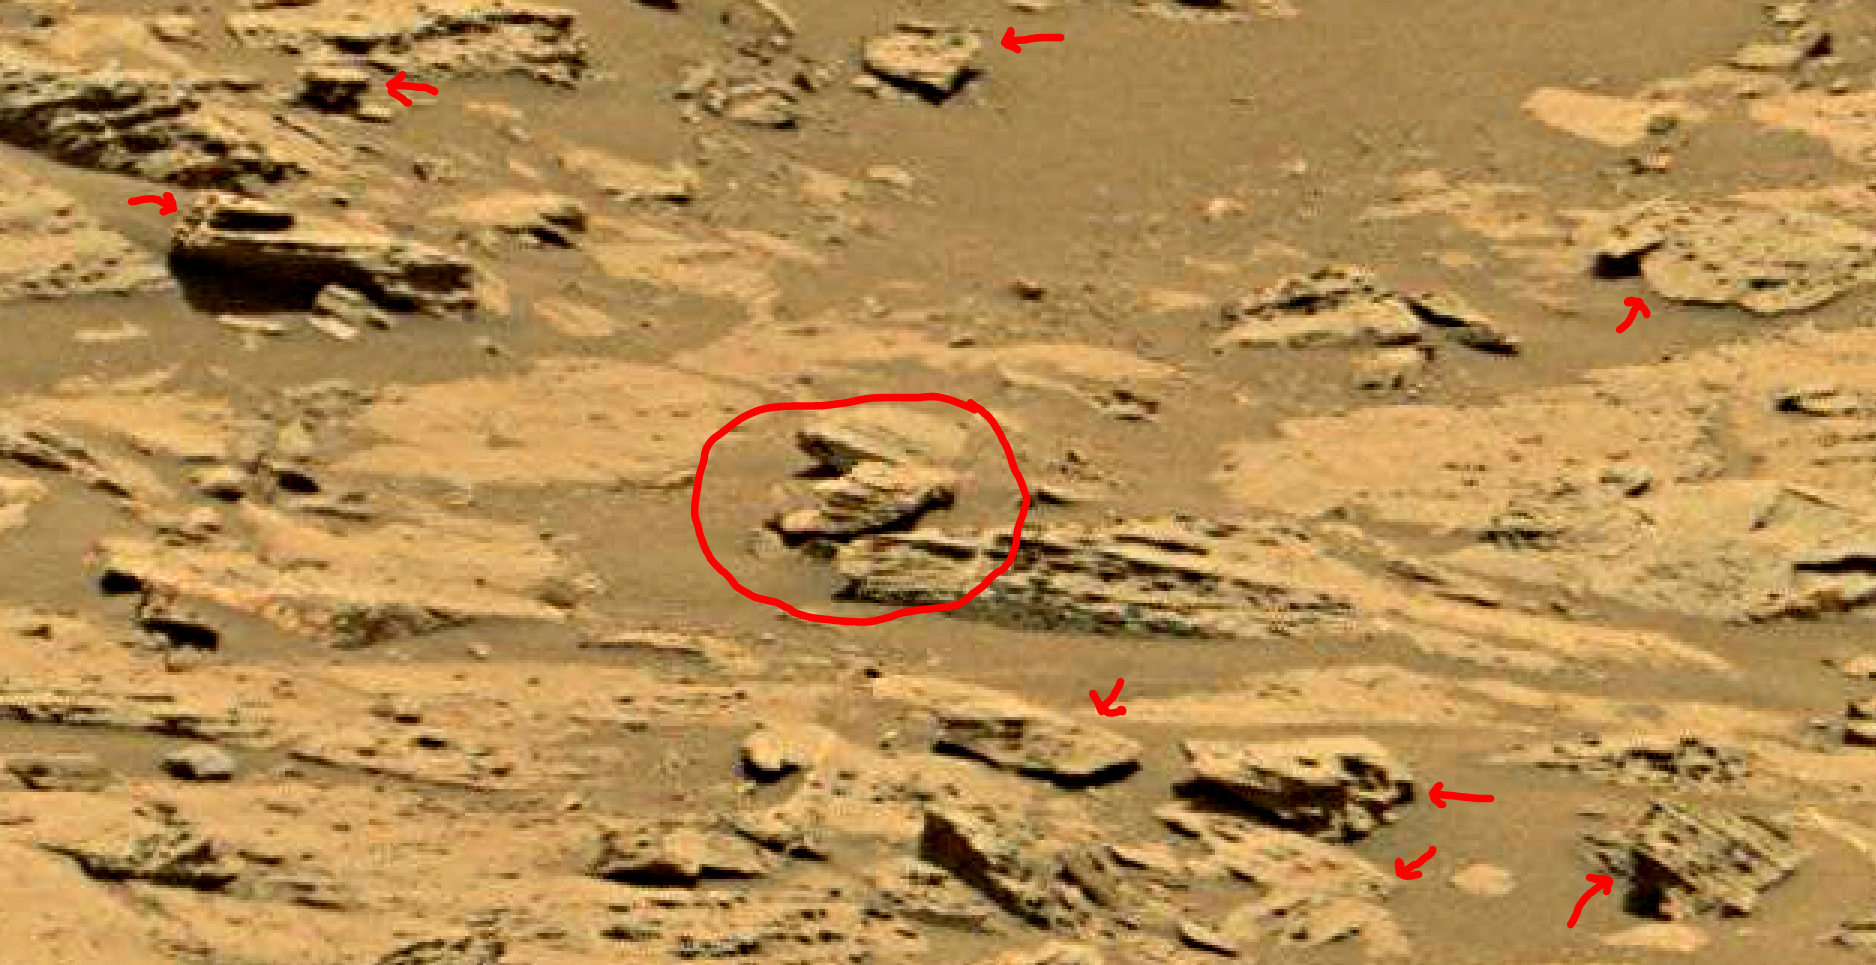 mars sol 1353 anomaly-artifacts 51 was life on mars